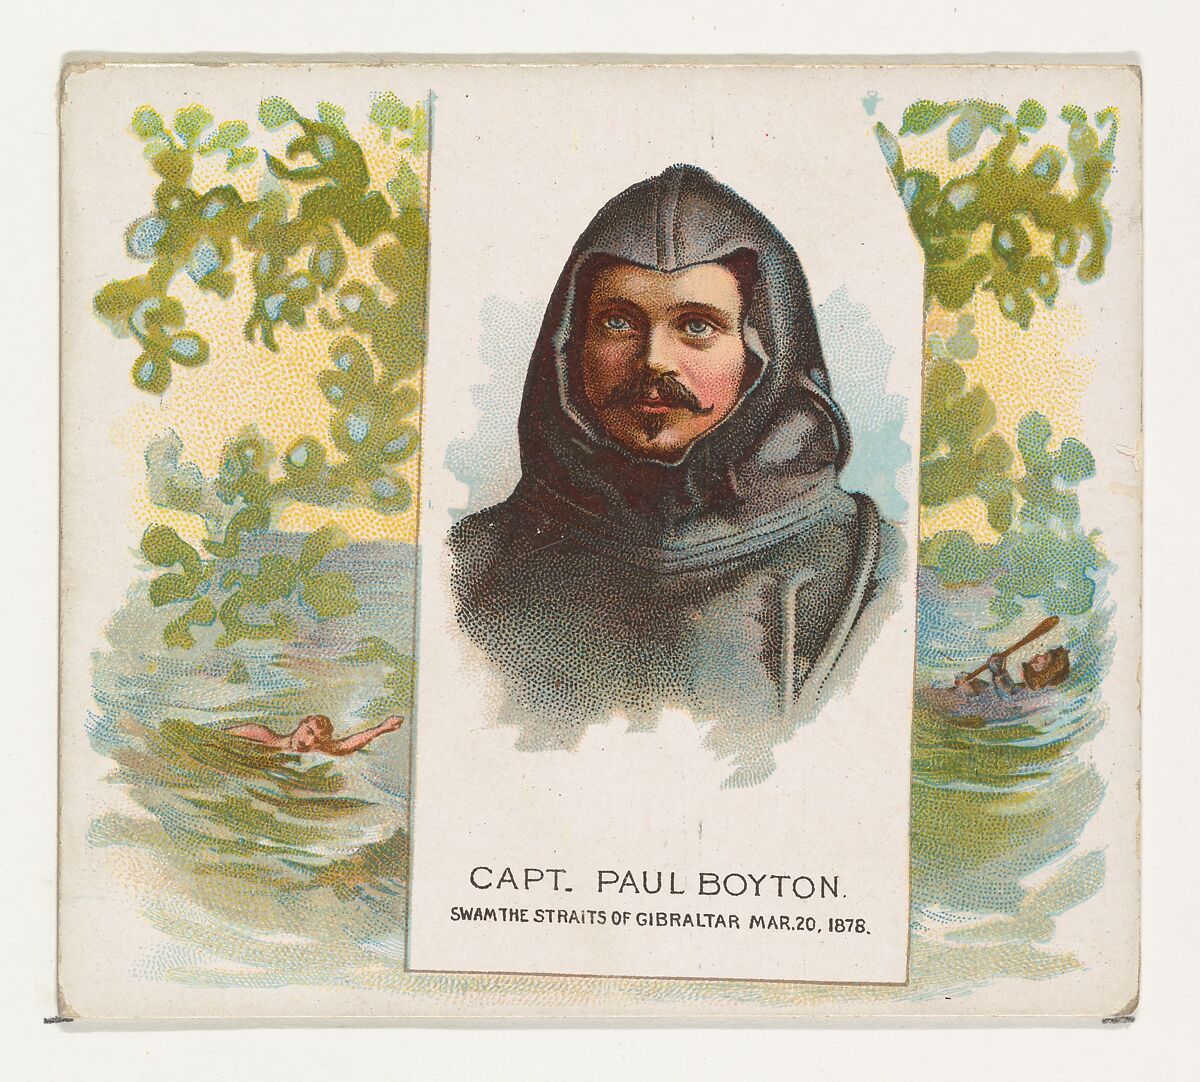 Captain Paul Boyton, Swam the Straits of Gibraltar, from World's Champions, Second Series (N43) for Allen & Ginter Cigarettes, Allen &amp; Ginter (American, Richmond, Virginia), Commercial lithograph 